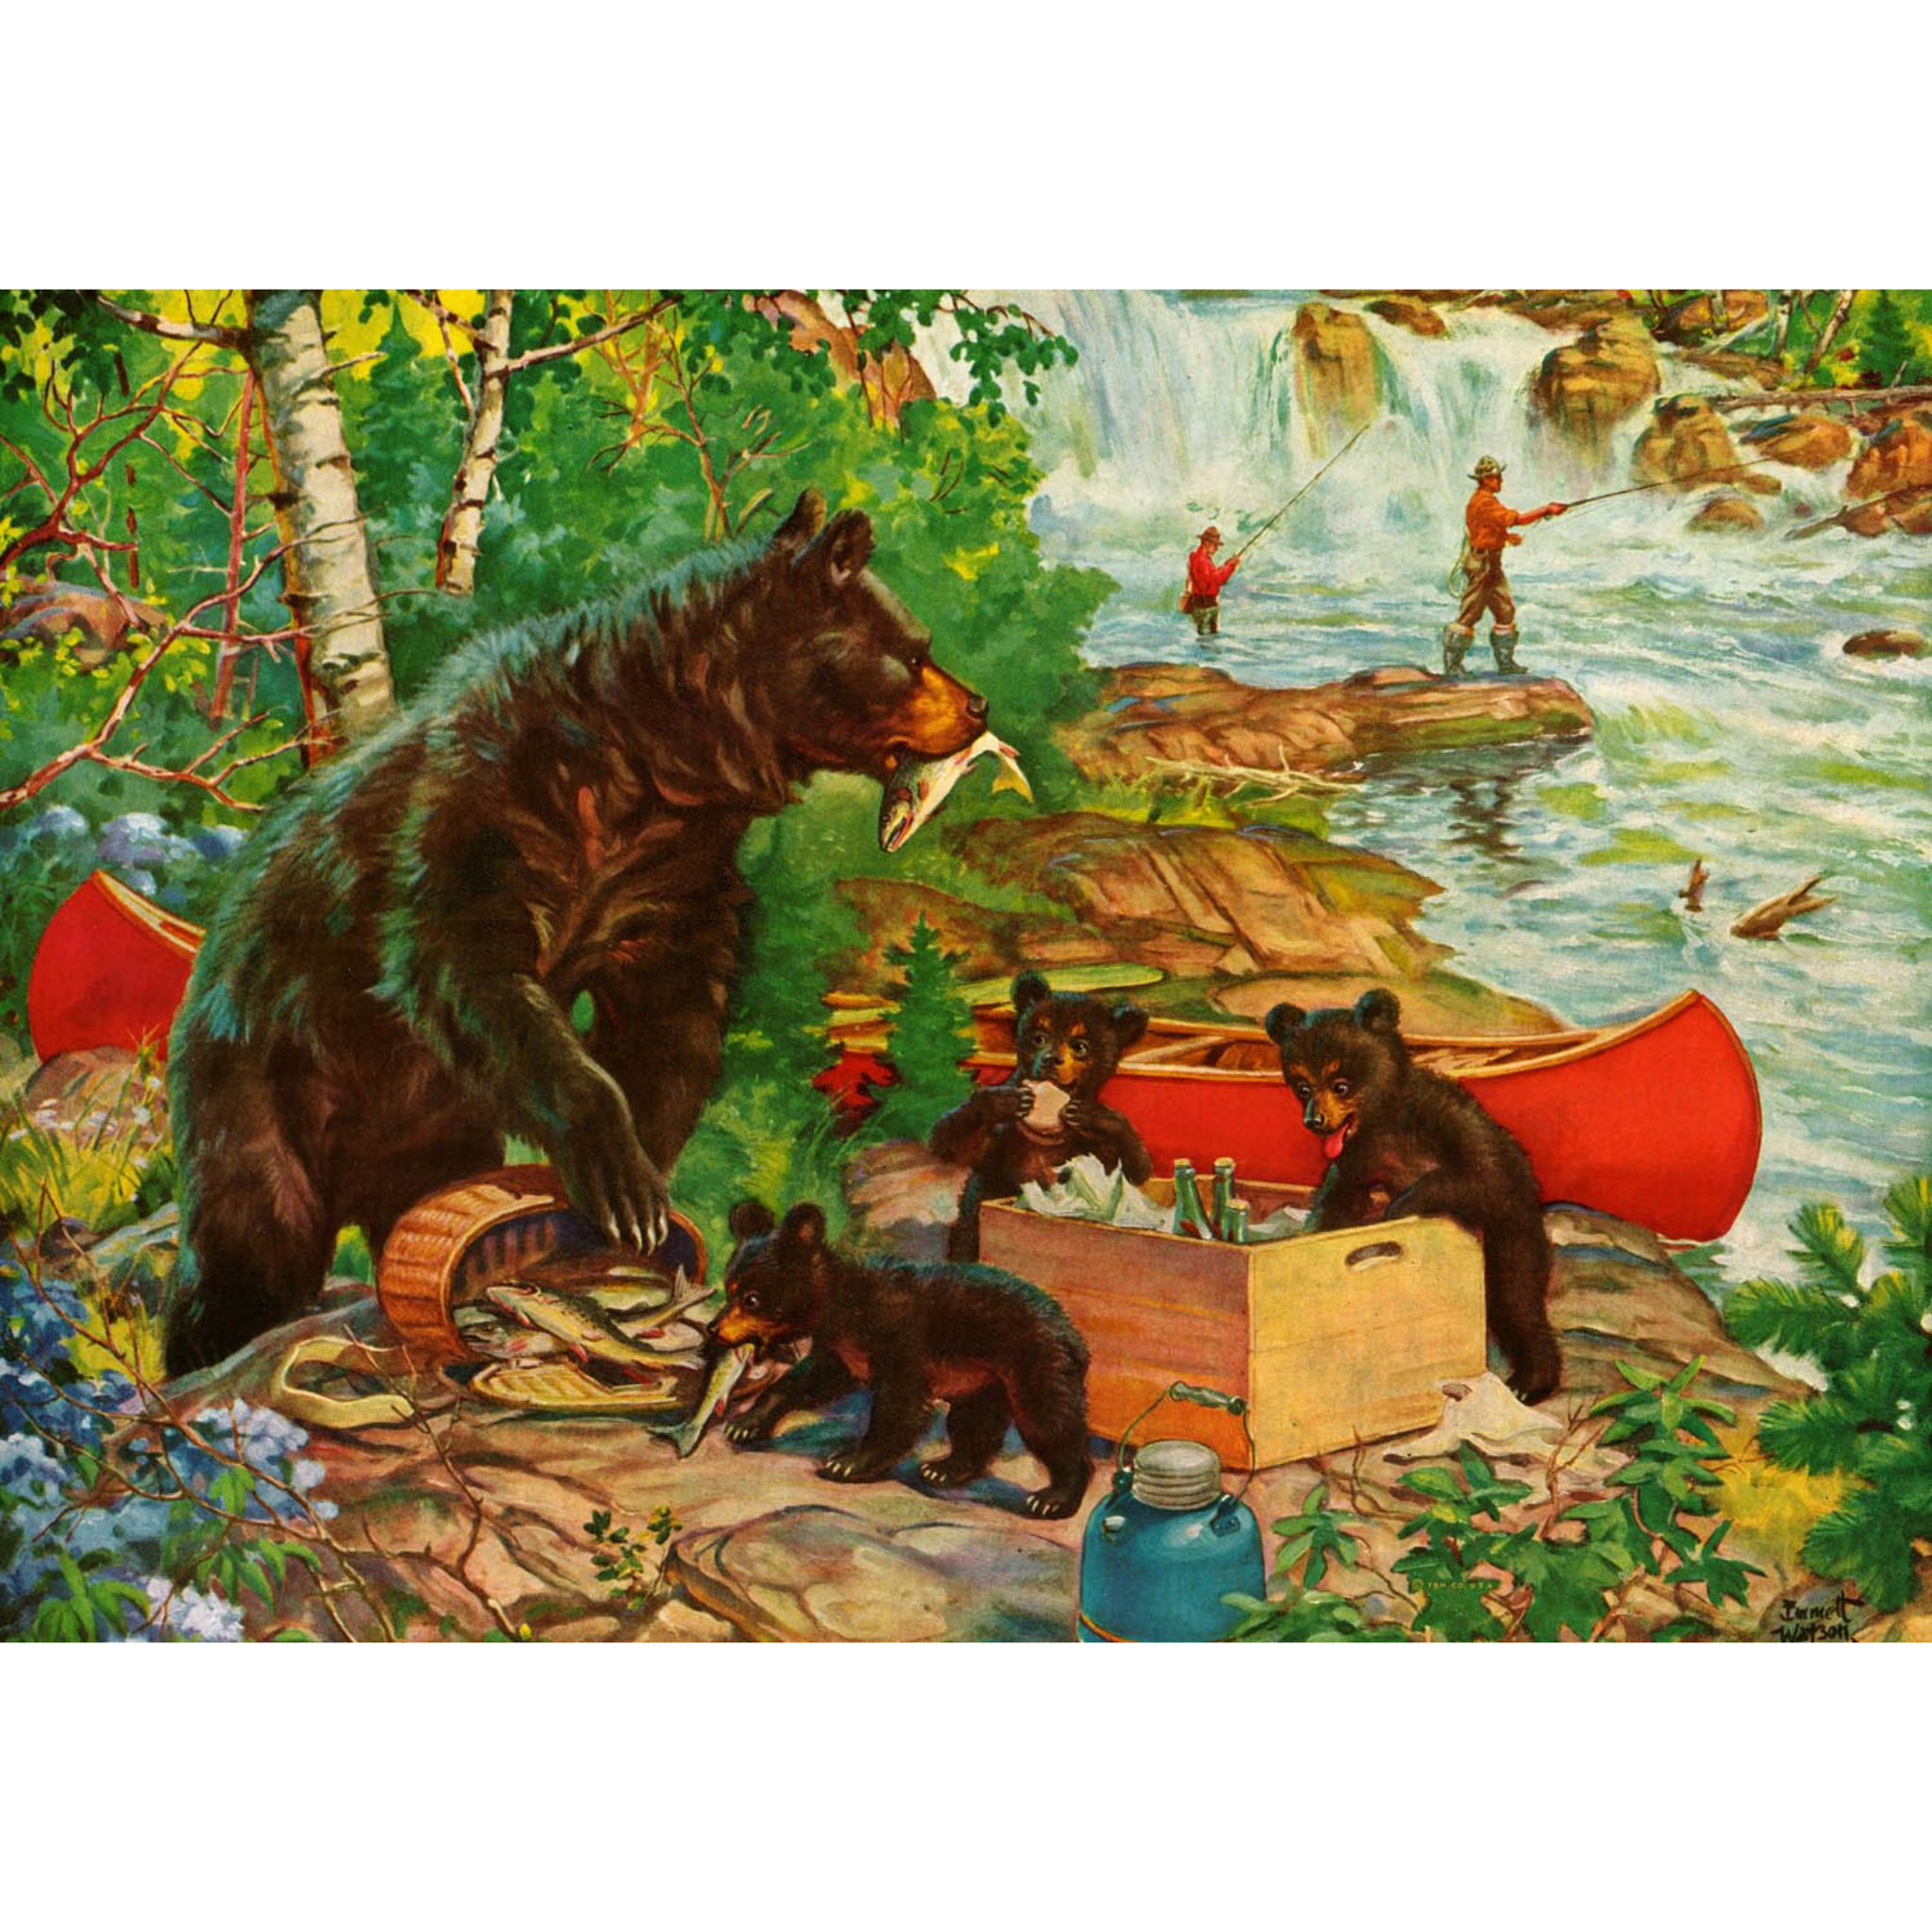 Bear and Cubs in Camp Two Men Fishing - ca. 1950 Lithograph